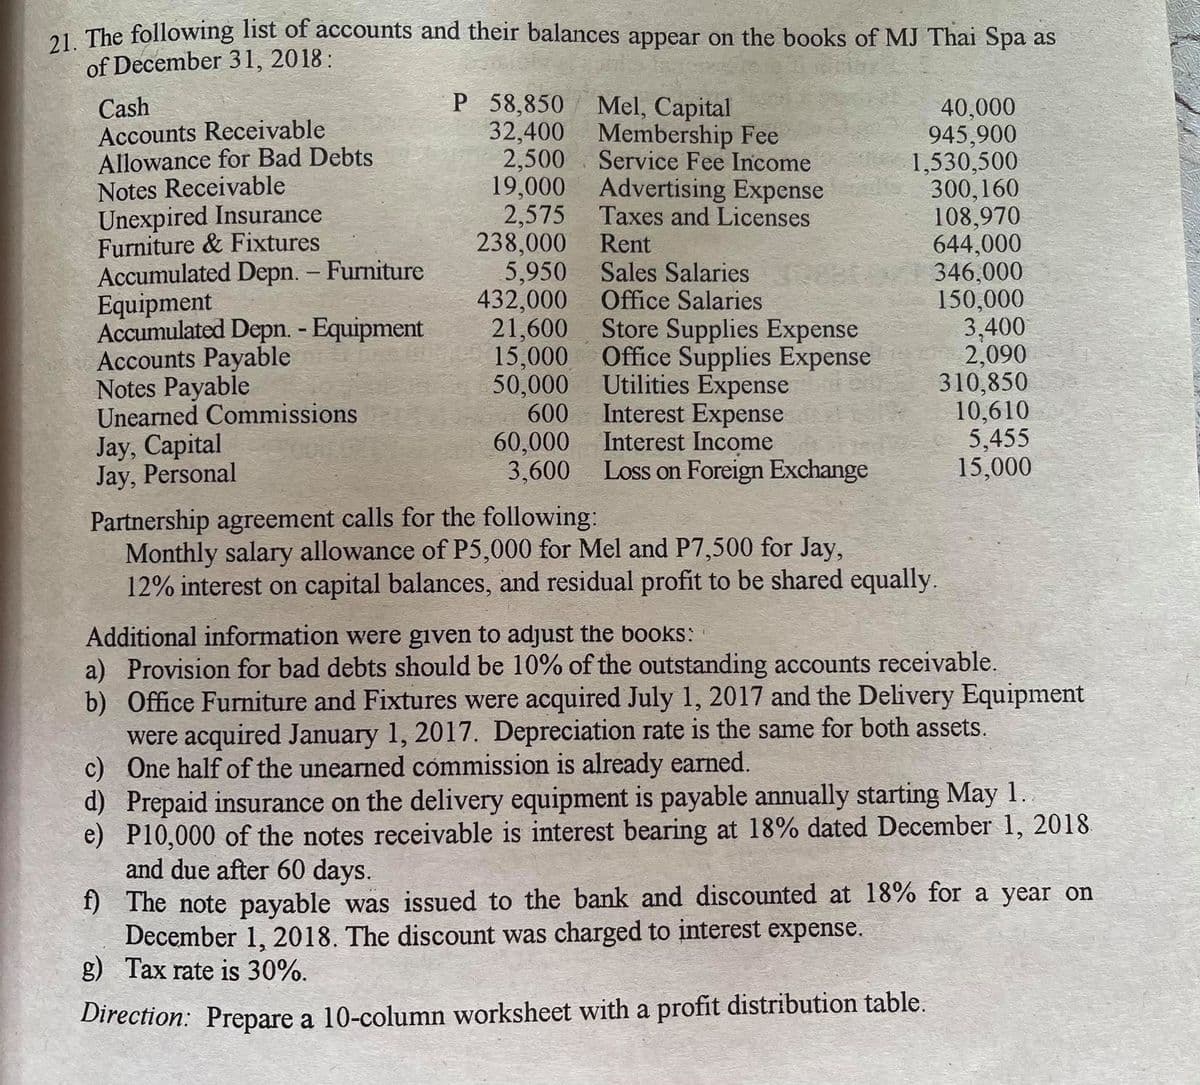 1 The following list of accounts and their balances appear on the books of MJ Thai Spa as
of December 31, 2018 :
Cash
Accounts Receivable
Allowance for Bad Debts
Notes Receivable
Unexpired Insurance
Furniture & Fixtures
Accumulated Depn. - Furniture
Equipment
Accumulated Depn. - Equipment
Accounts Payable
Notes Payable
Unearned Commissions
Jay, Capital
Jay, Personal
P 58,850 Mel, Capital
32,400 Membership Fee
2,500
19,000 Advertising Expense
2,575
238,000
5,950
432,000
21,600 Store Supplies Expense
15,000
50,000 Utilities Expense
600
40,000
945,900
1,530,500
300,160
108,970
644,000
346,000
150,000
3,400
2,090
310,850
10,610
5,455
15,000
Service Fee Income
Taxes and Licenses
Rent
Sales Salaries
Office Salaries
Office Supplies Expense
60,000
3,600
Interest Expense
Interest Income
Loss on Foreign Exchange
Partnership agreement calls for the following:
Monthly salary allowance of P5,000 for Mel and P7,500 for Jay,
12% interest on capital balances, and residual profit to be shared equally.
Additional information were given to adjust the books:
a) Provision for bad debts should be 10% of the outstanding accounts receivable.
b) Office Furniture and Fixtures were acquired July 1, 2017 and the Delivery Equipment
were acquired January 1, 2017. Depreciation rate is the same for both assets.
c) One half of the unearned commission is already earned.
d) Prepaid insurance on the delivery equipment is payable annually starting May 1.
e) P10,000 of the notes receivable is interest bearing at 18% dated December 1, 2018
and due after 60 days.
f) The note payable was issued to the bank and discounted at 18% for a year on
December 1, 2018. The discount was charged to interest expense.
g) Tax rate is 30%.
Direction: Prepare a 10-column worksheet with a profit distribution table.
